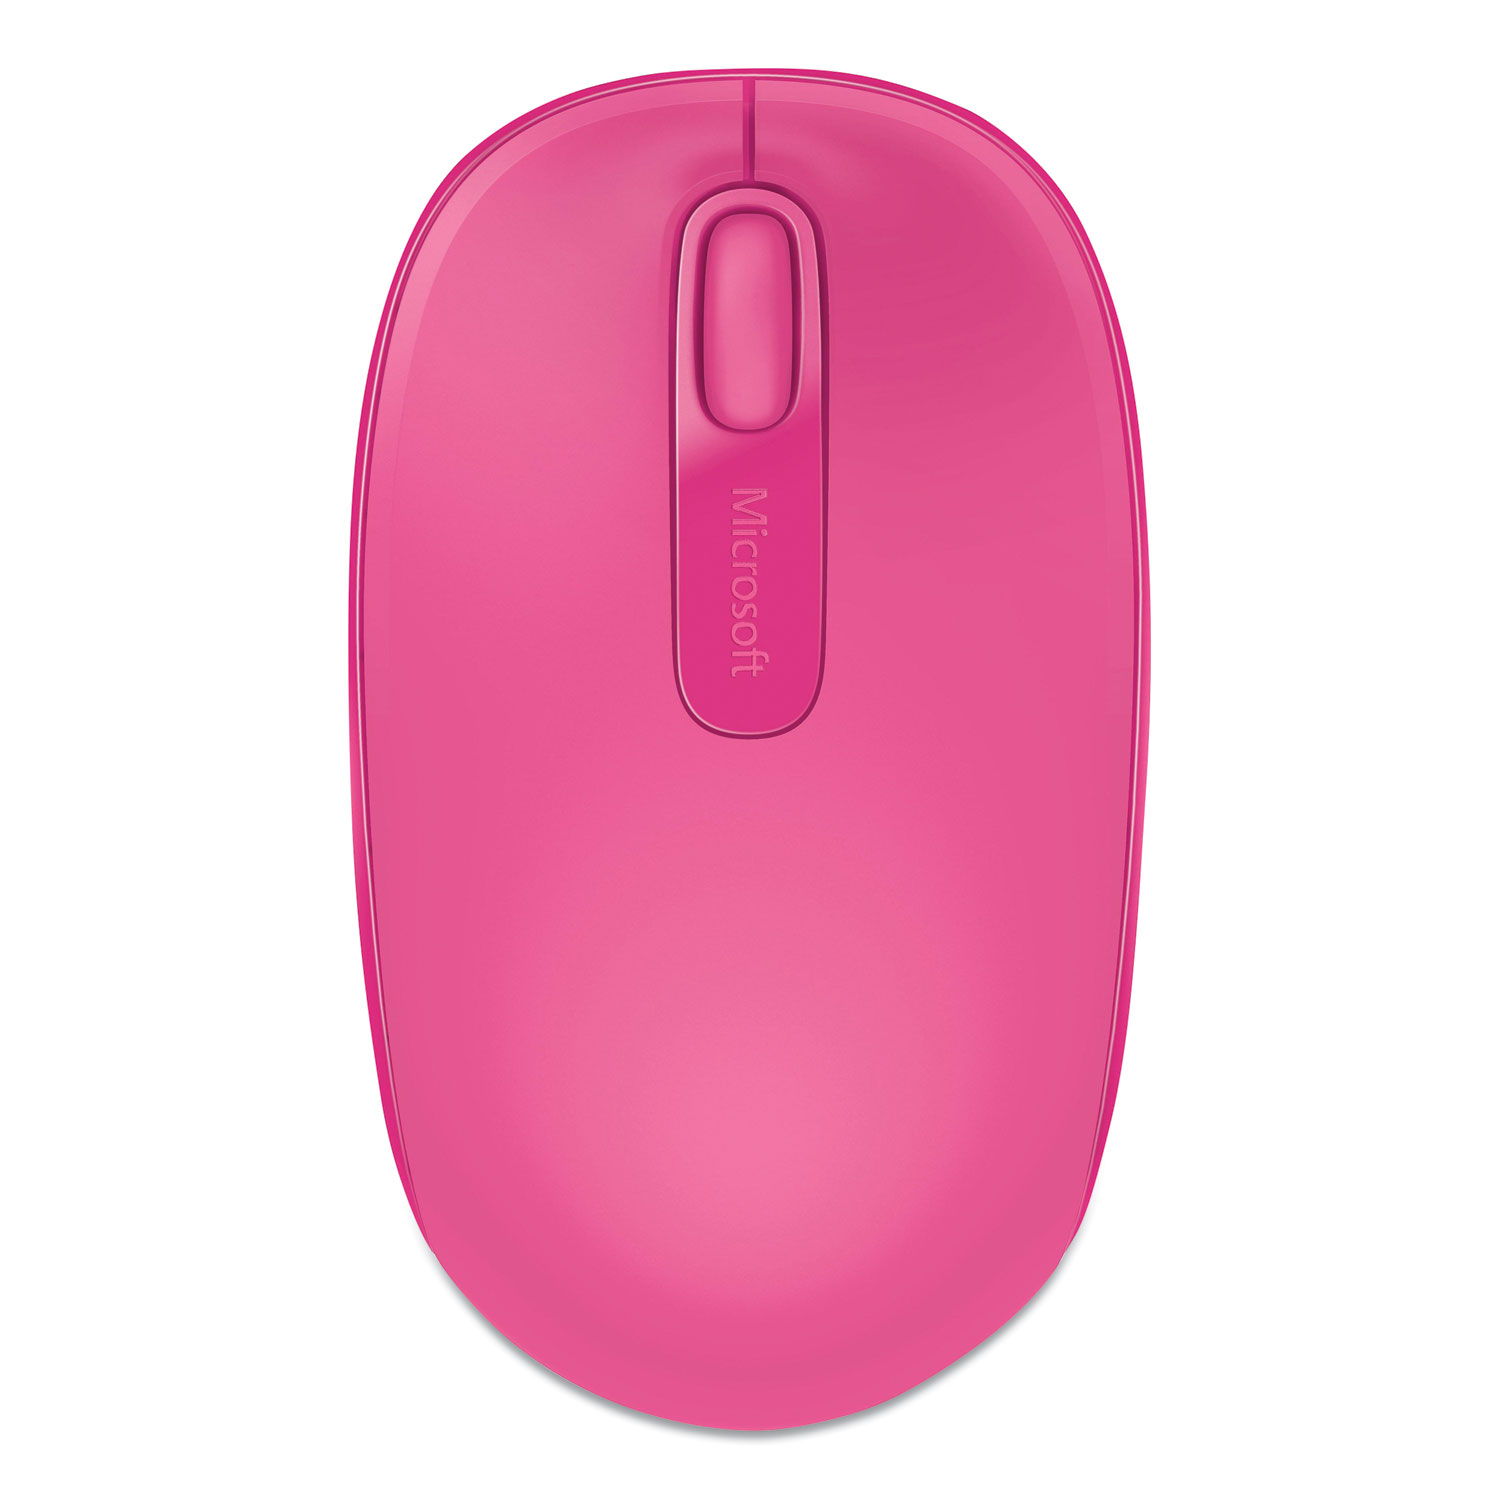  Microsoft U7Z-00062 Mobile 1850 Wireless Optical Mouse, 2.4 GHz Frequency/16.4 ft Wireless Range, Left/Right Hand Use, Magenta (MSF2229097) 